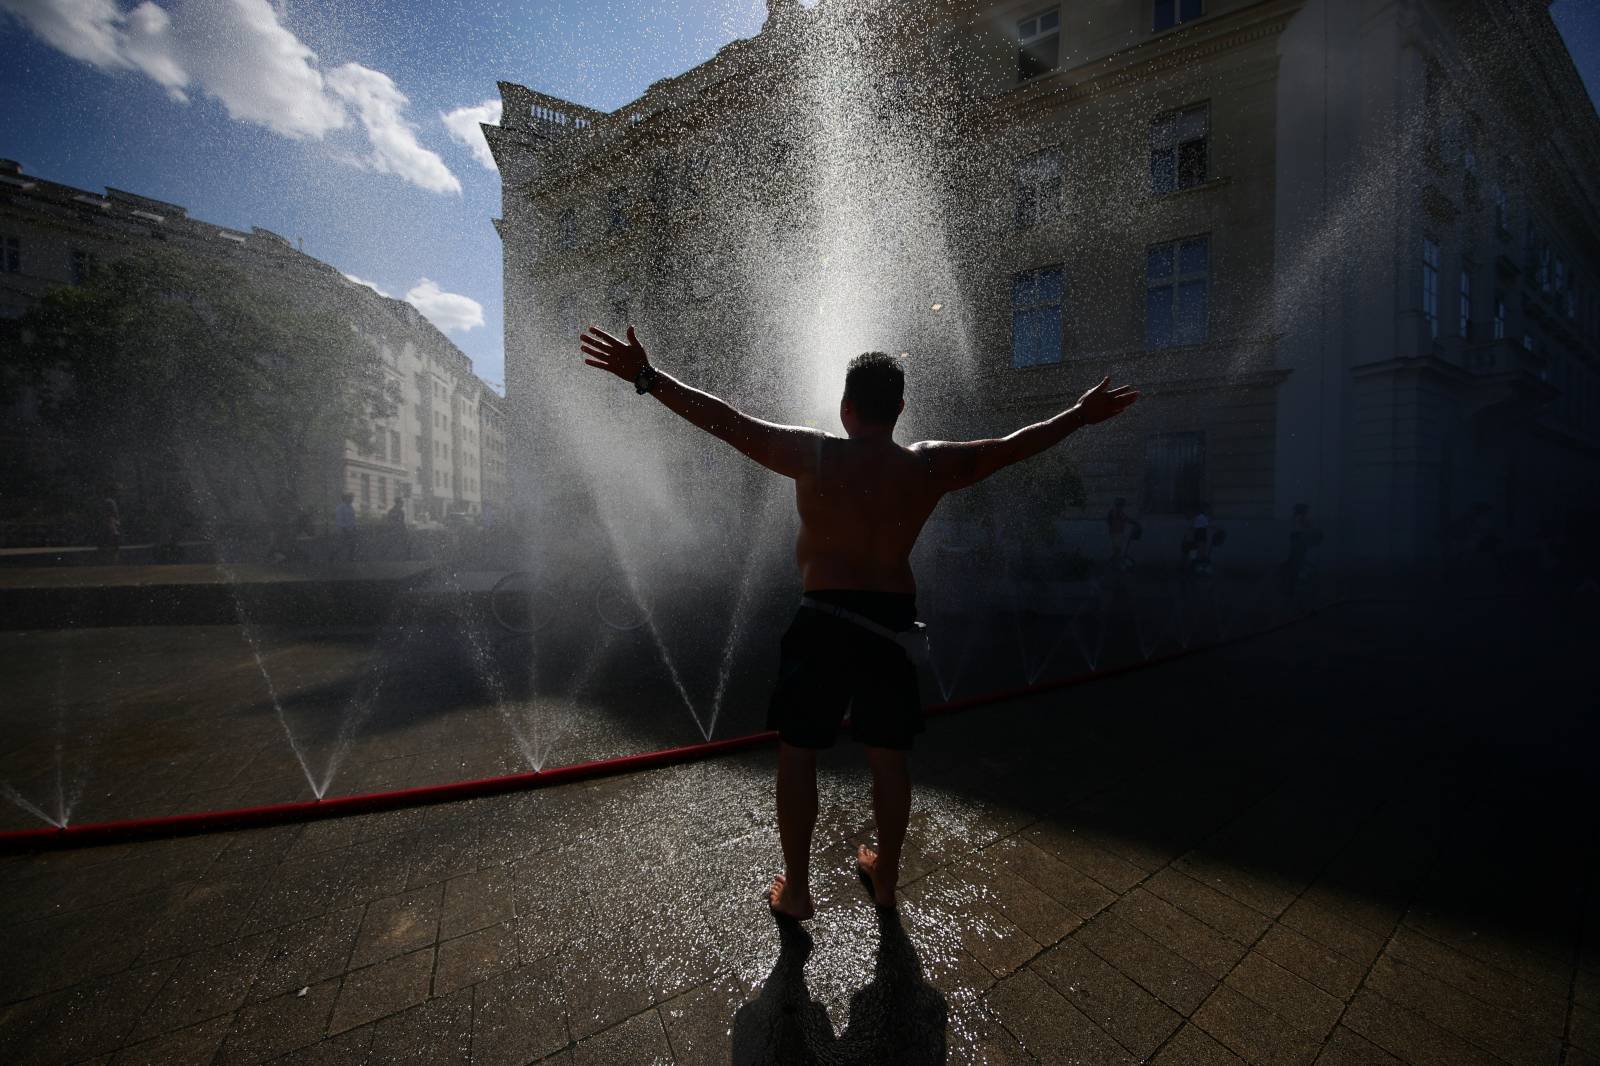 A man cools off under water sprinklers during a heat wave in Vienna